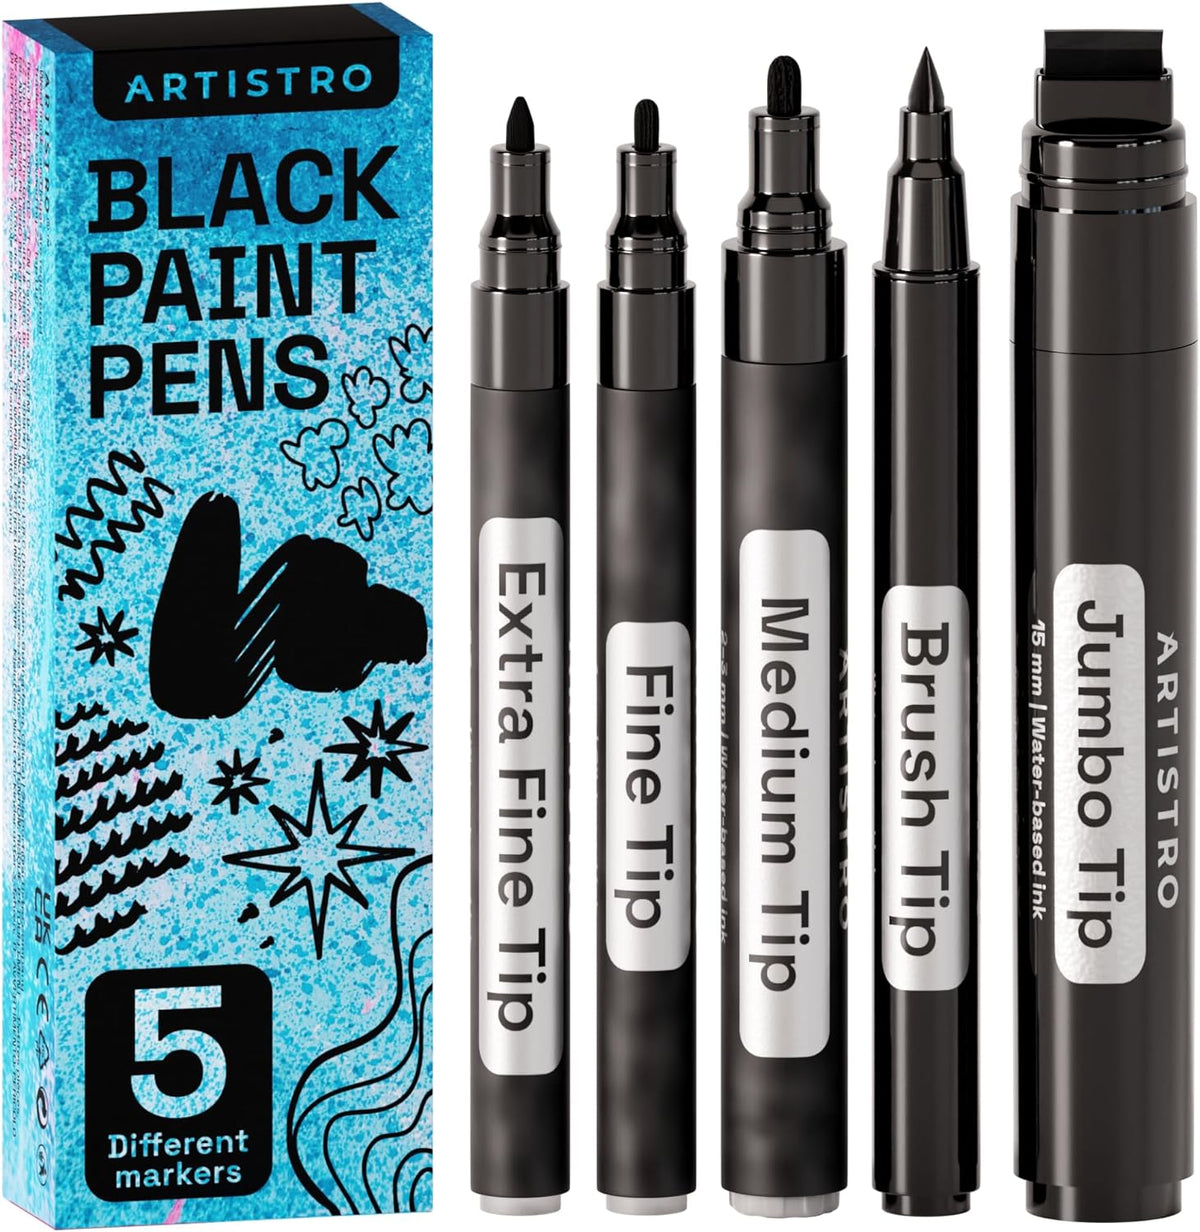 Art Supplies for Painting: Art Pens, Painting Markers & Best Art